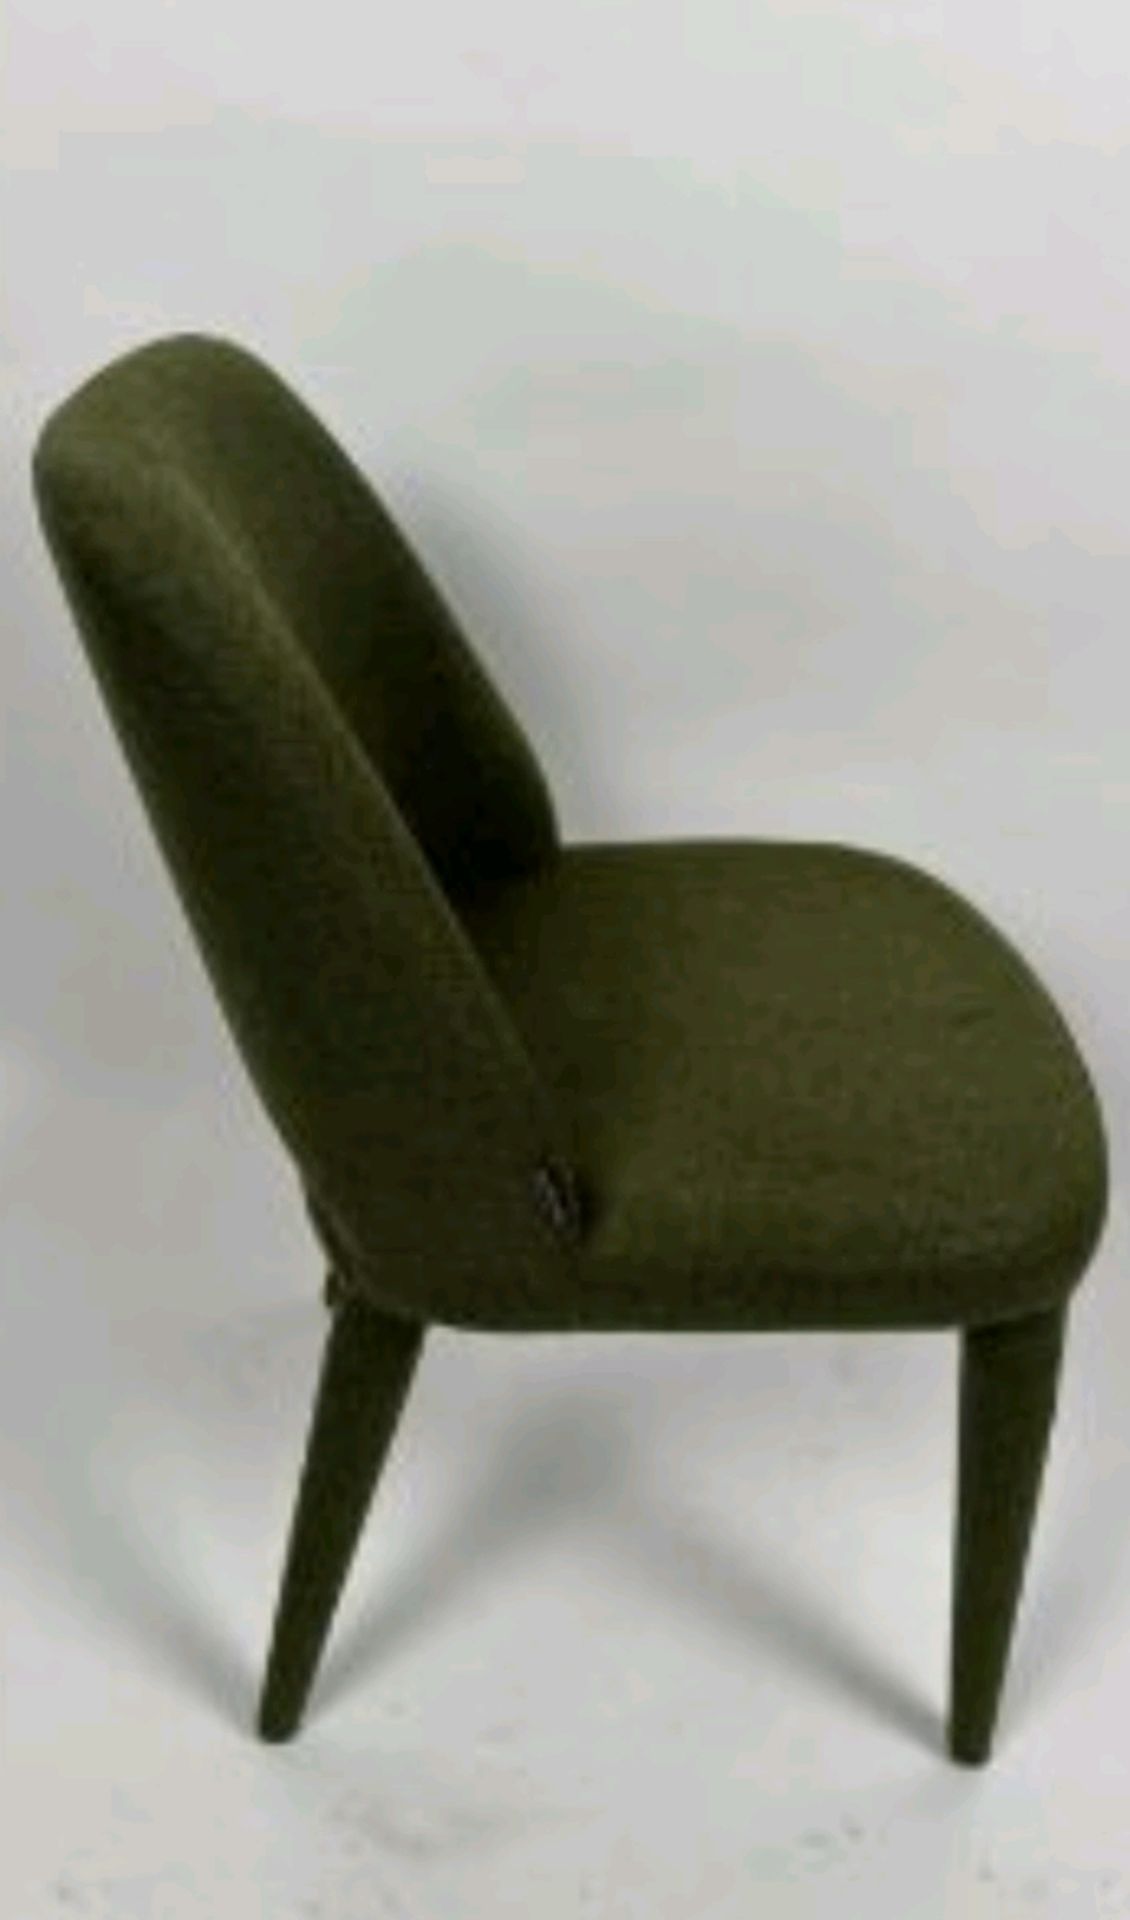 Pols Potten Holy Padded Chair Forest Green - Image 3 of 5